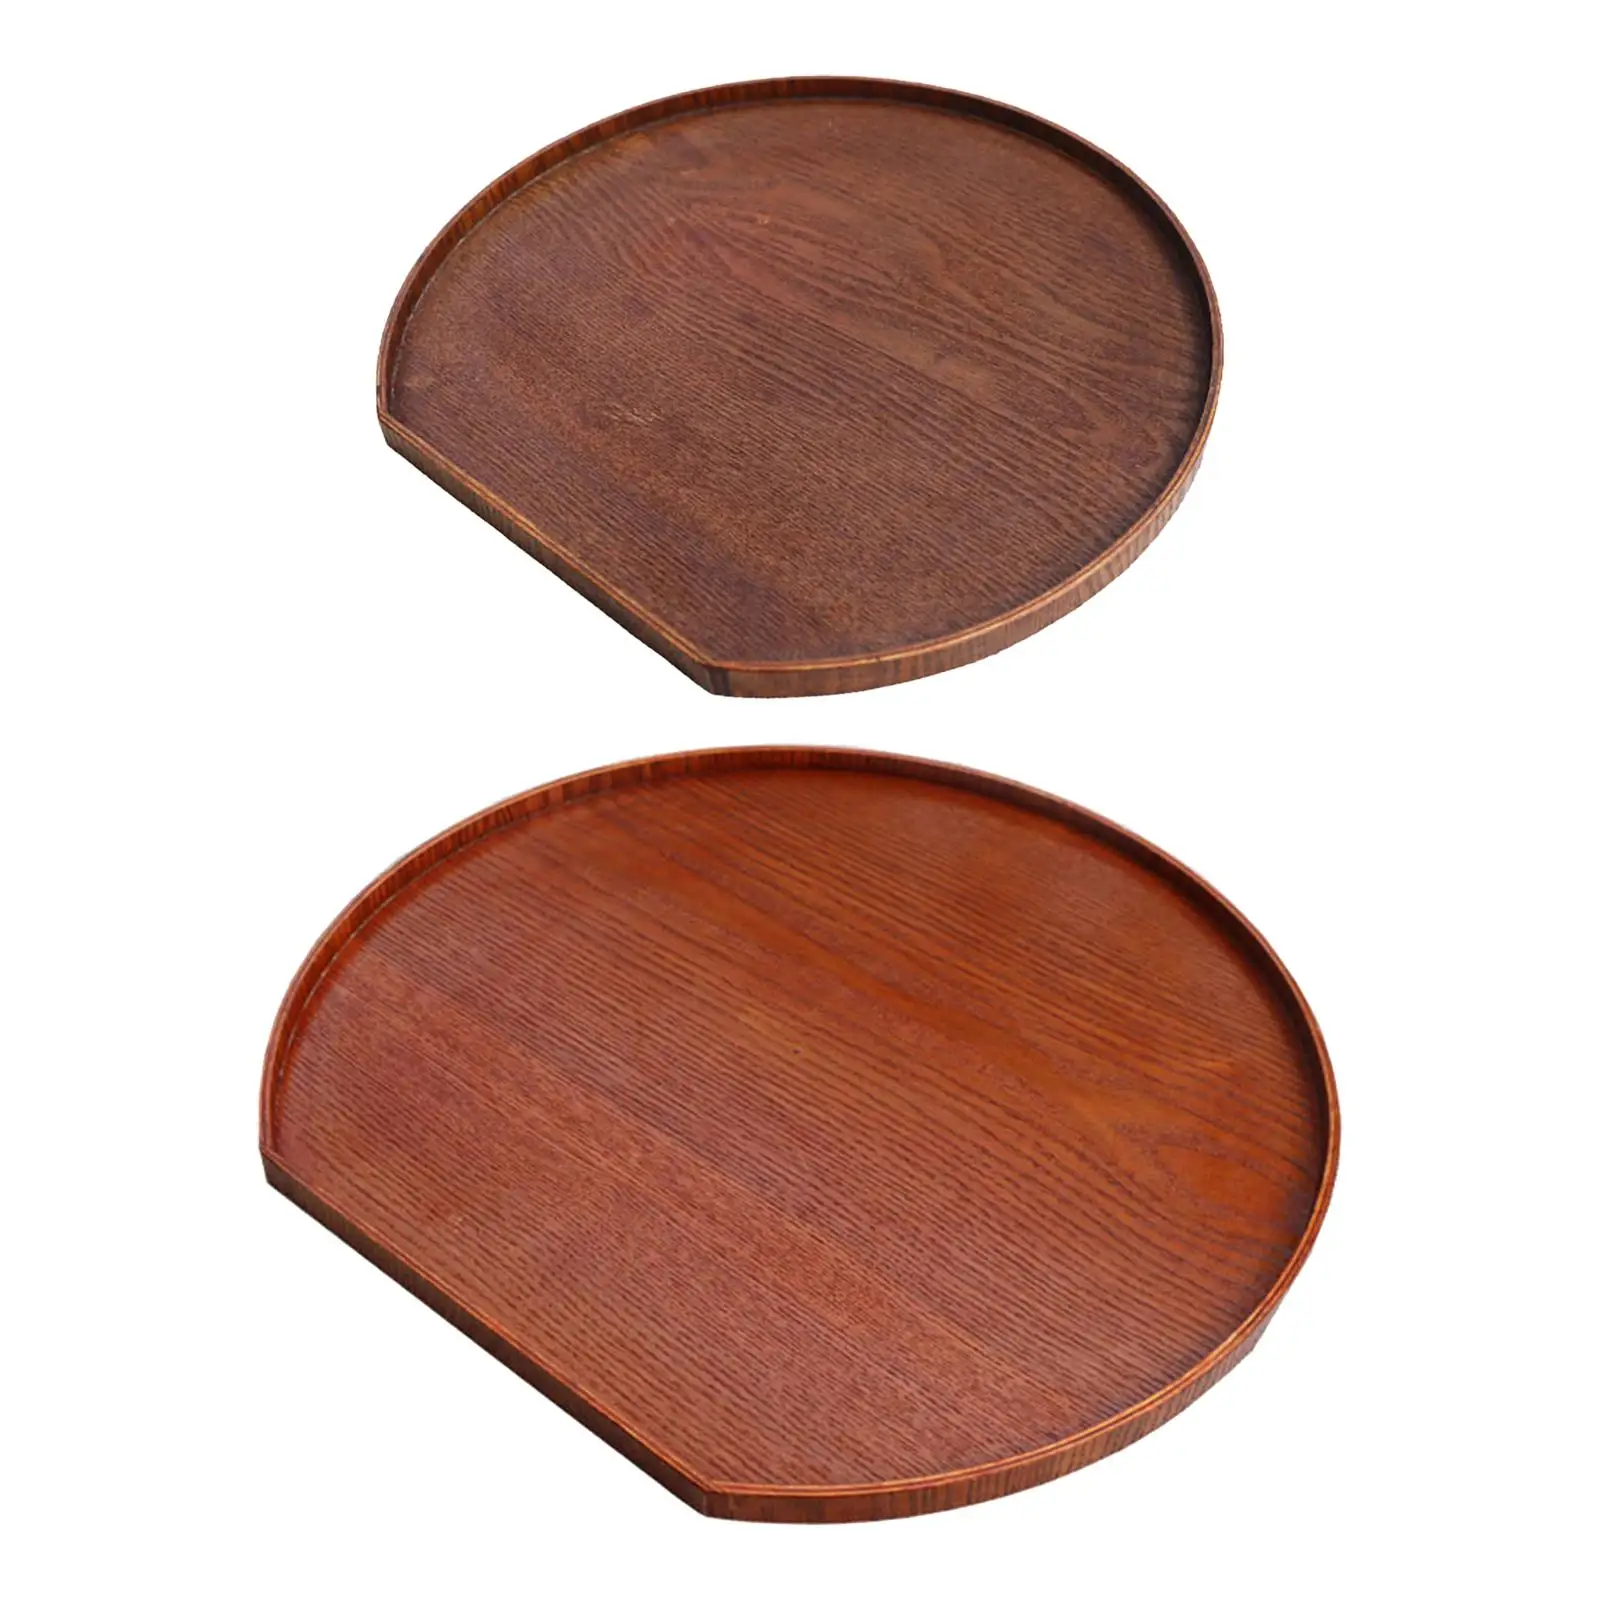 Wooden Serving Tray Plate Round Modern Dinner Tray Tray Decorative Tray for Bathroom Coffee Table Ottoman Decor